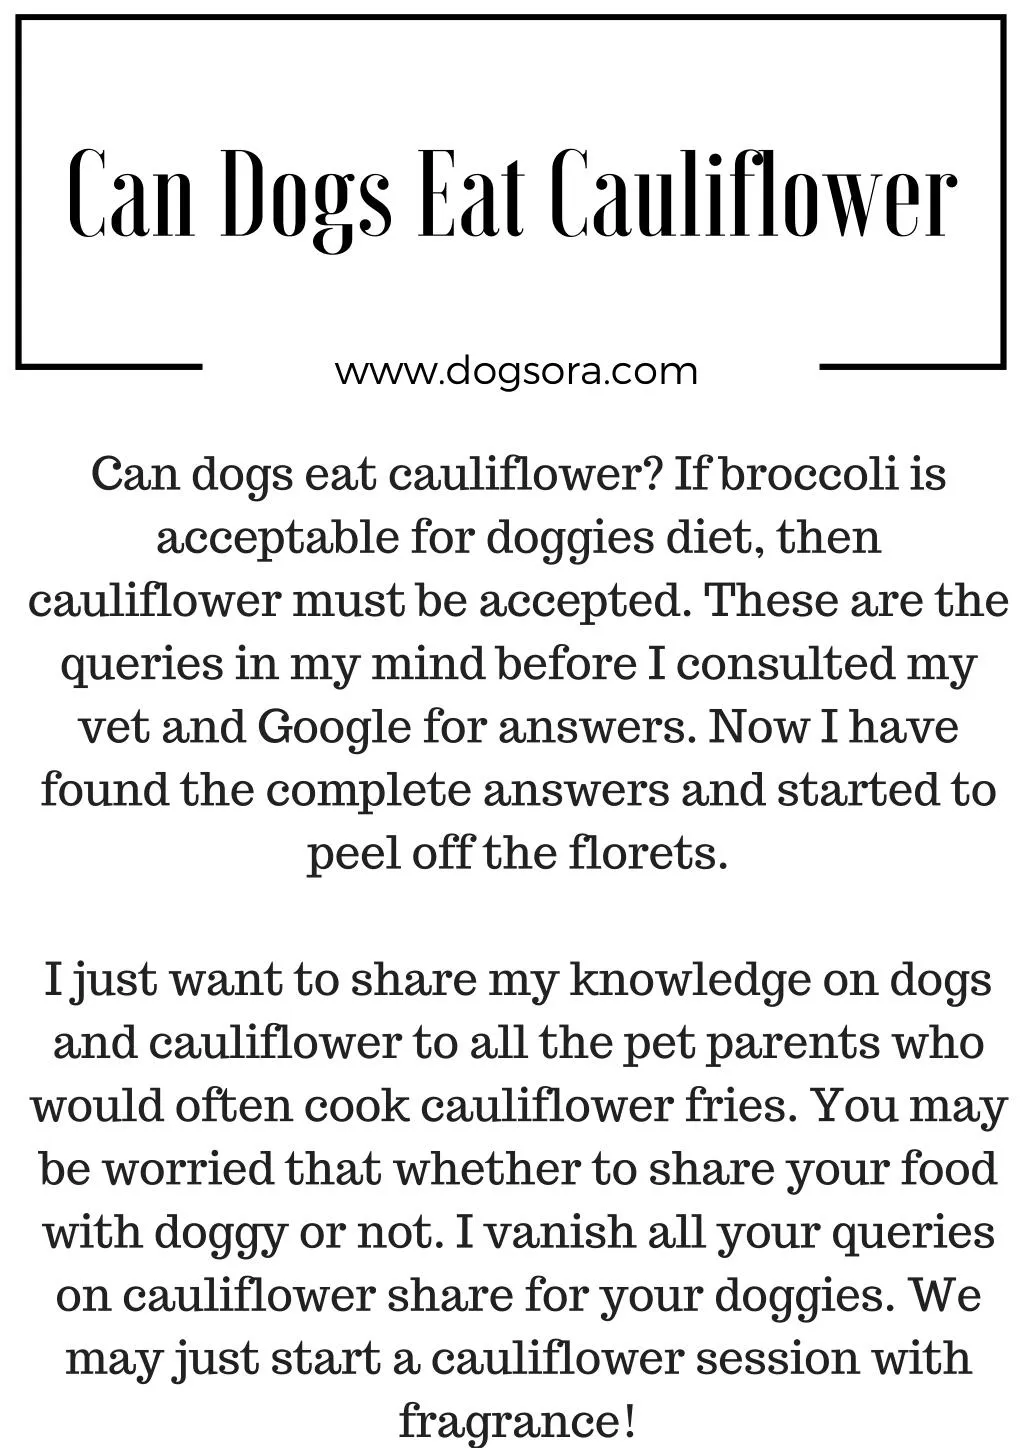 can dogs ea t cauliflower